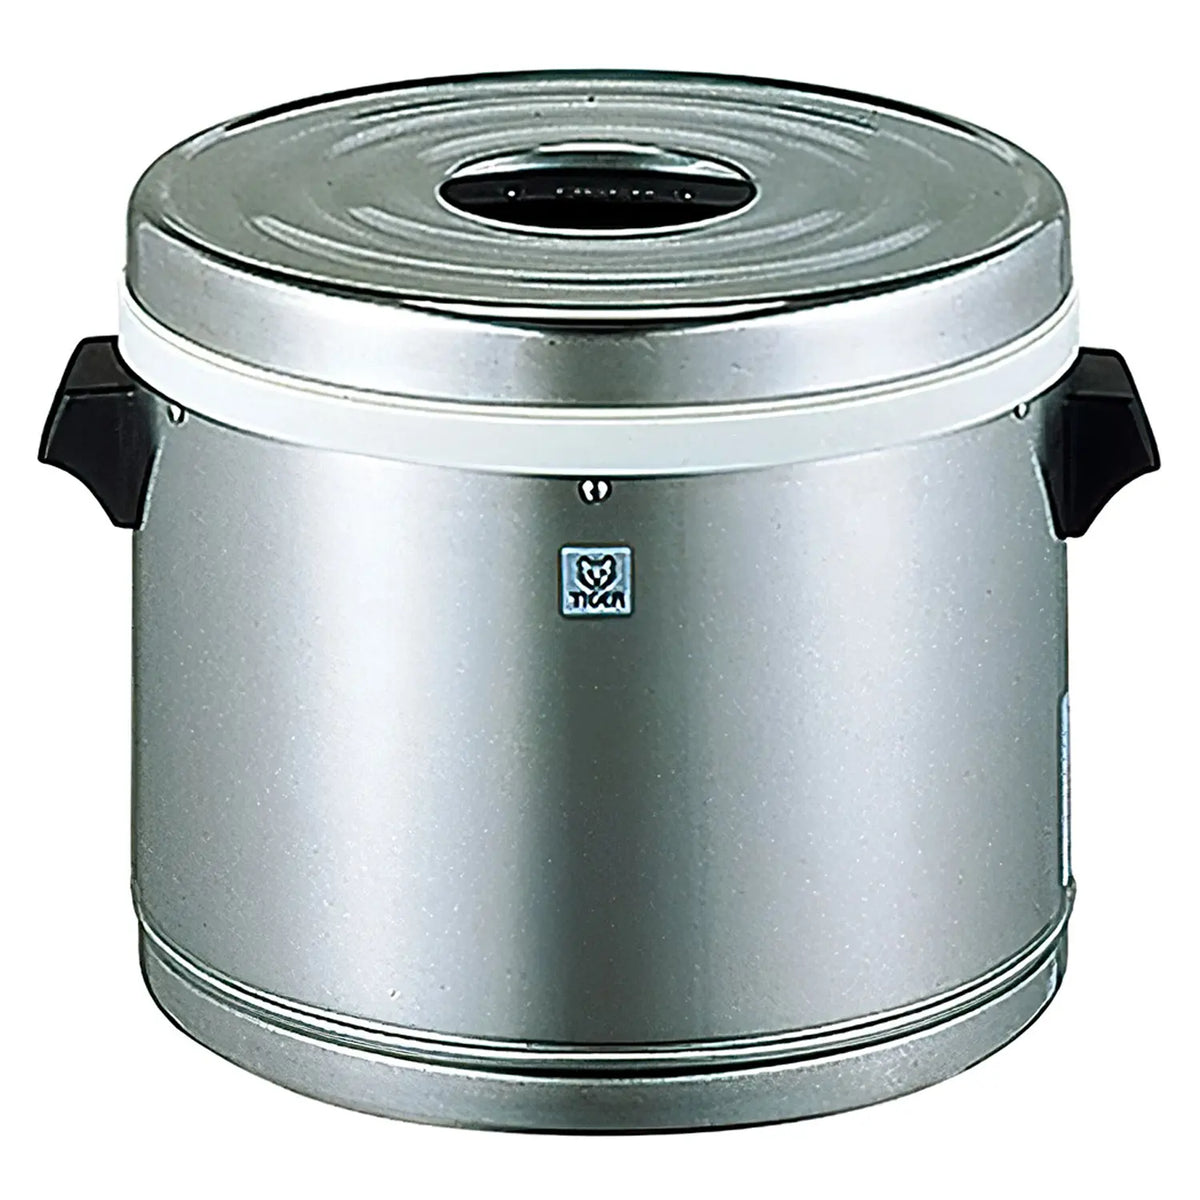 TIGER Non-Electric Stainless Steel Double-Wall Insulated Thermal Rice Warmer 3.9L